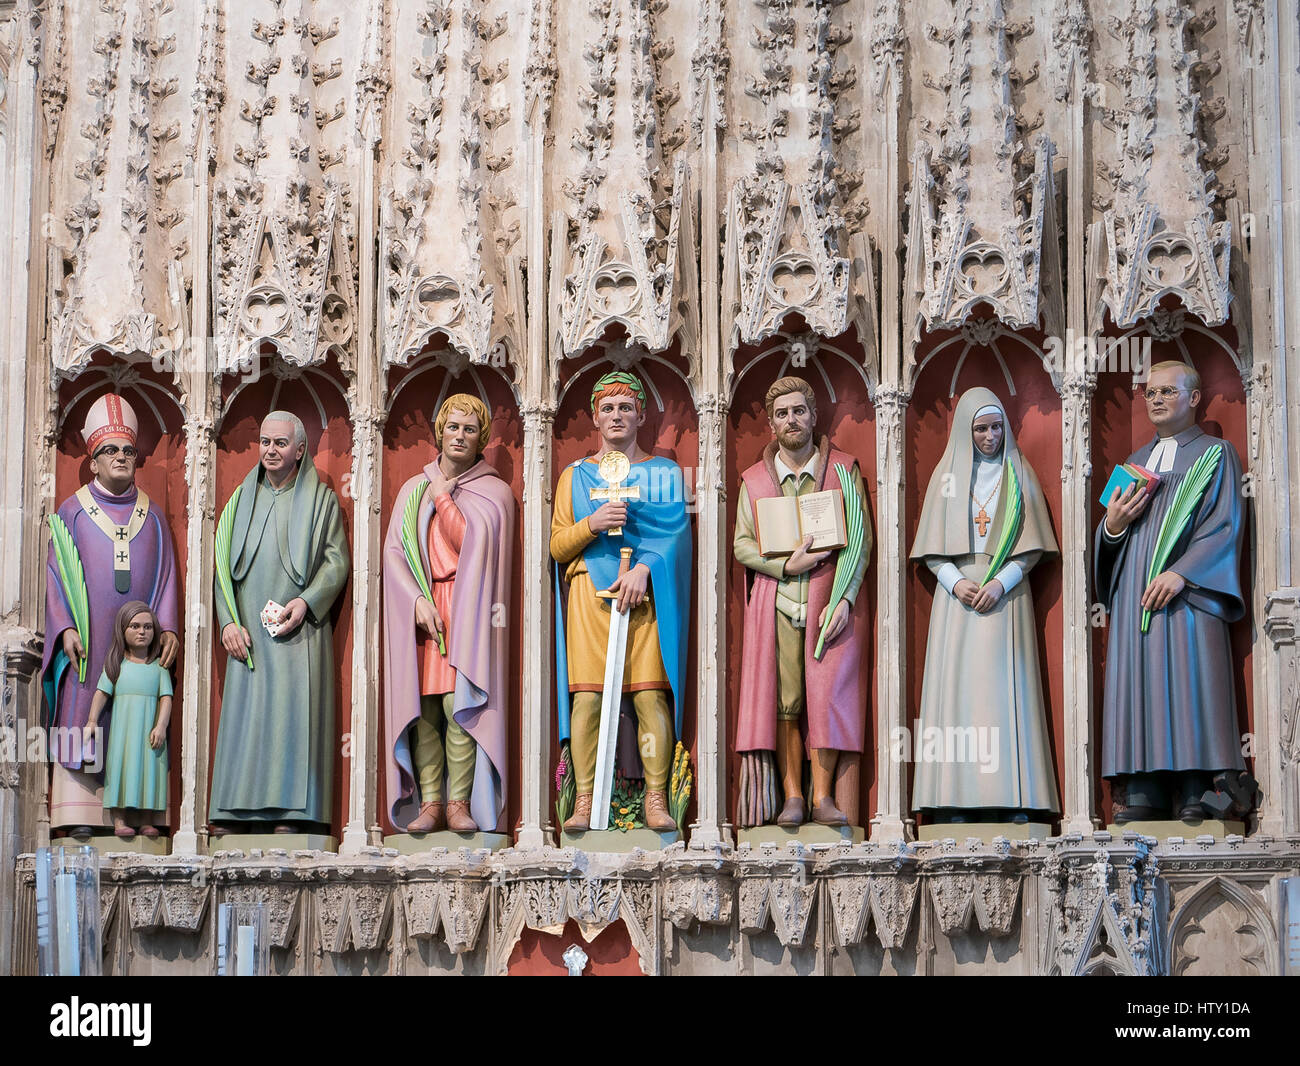 Seven restored Martyr statues in nave of St Albans Abbey church Hertfordshire England UK Stock Photo